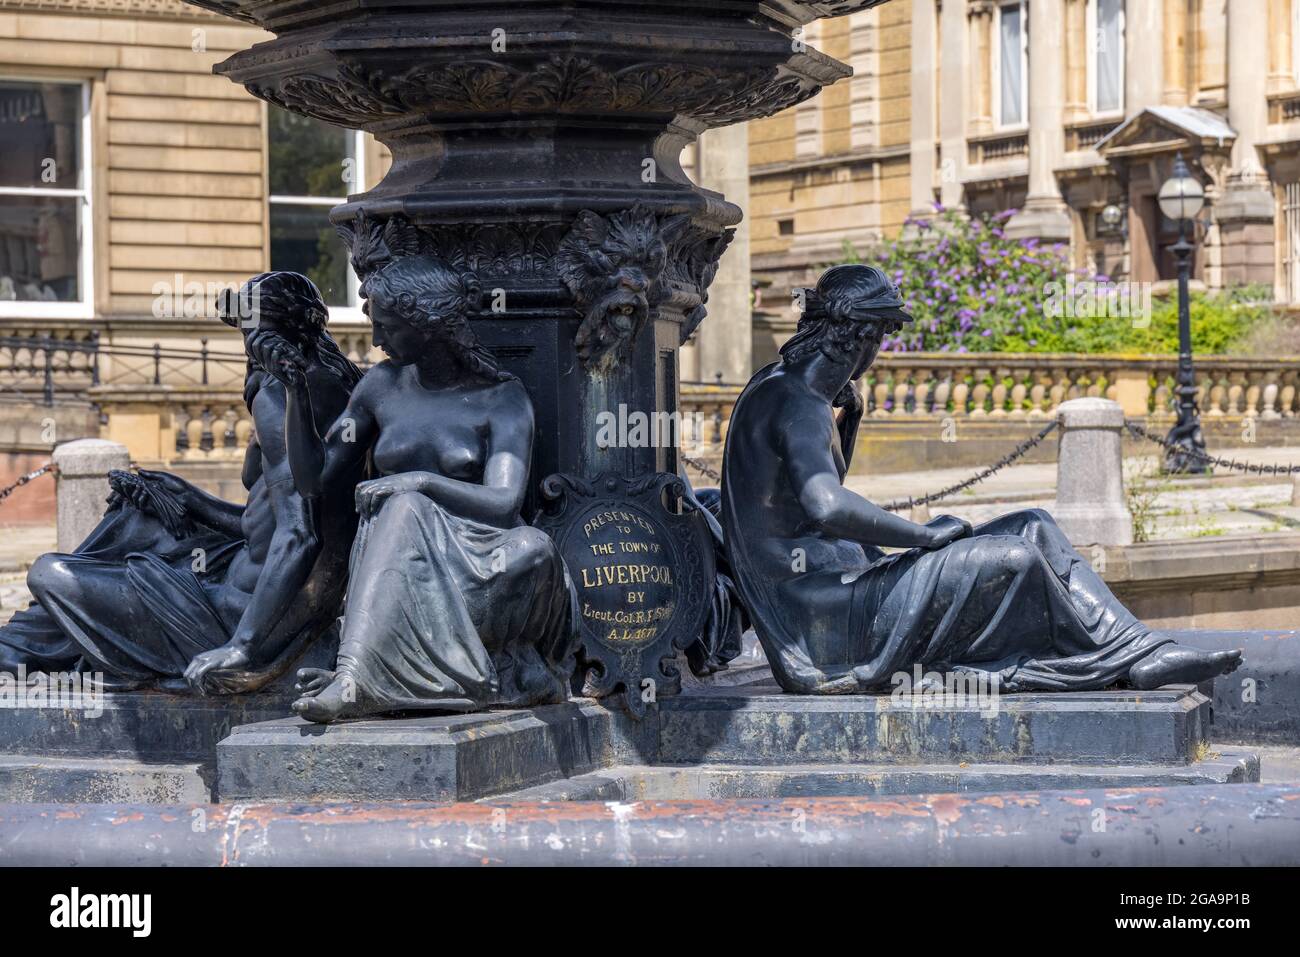 LIVERPOOL, UK - JULY 14 : Steble Fountain in William Brown street conservation area of Liverpool, England UK on July 14, 2021 Stock Photo